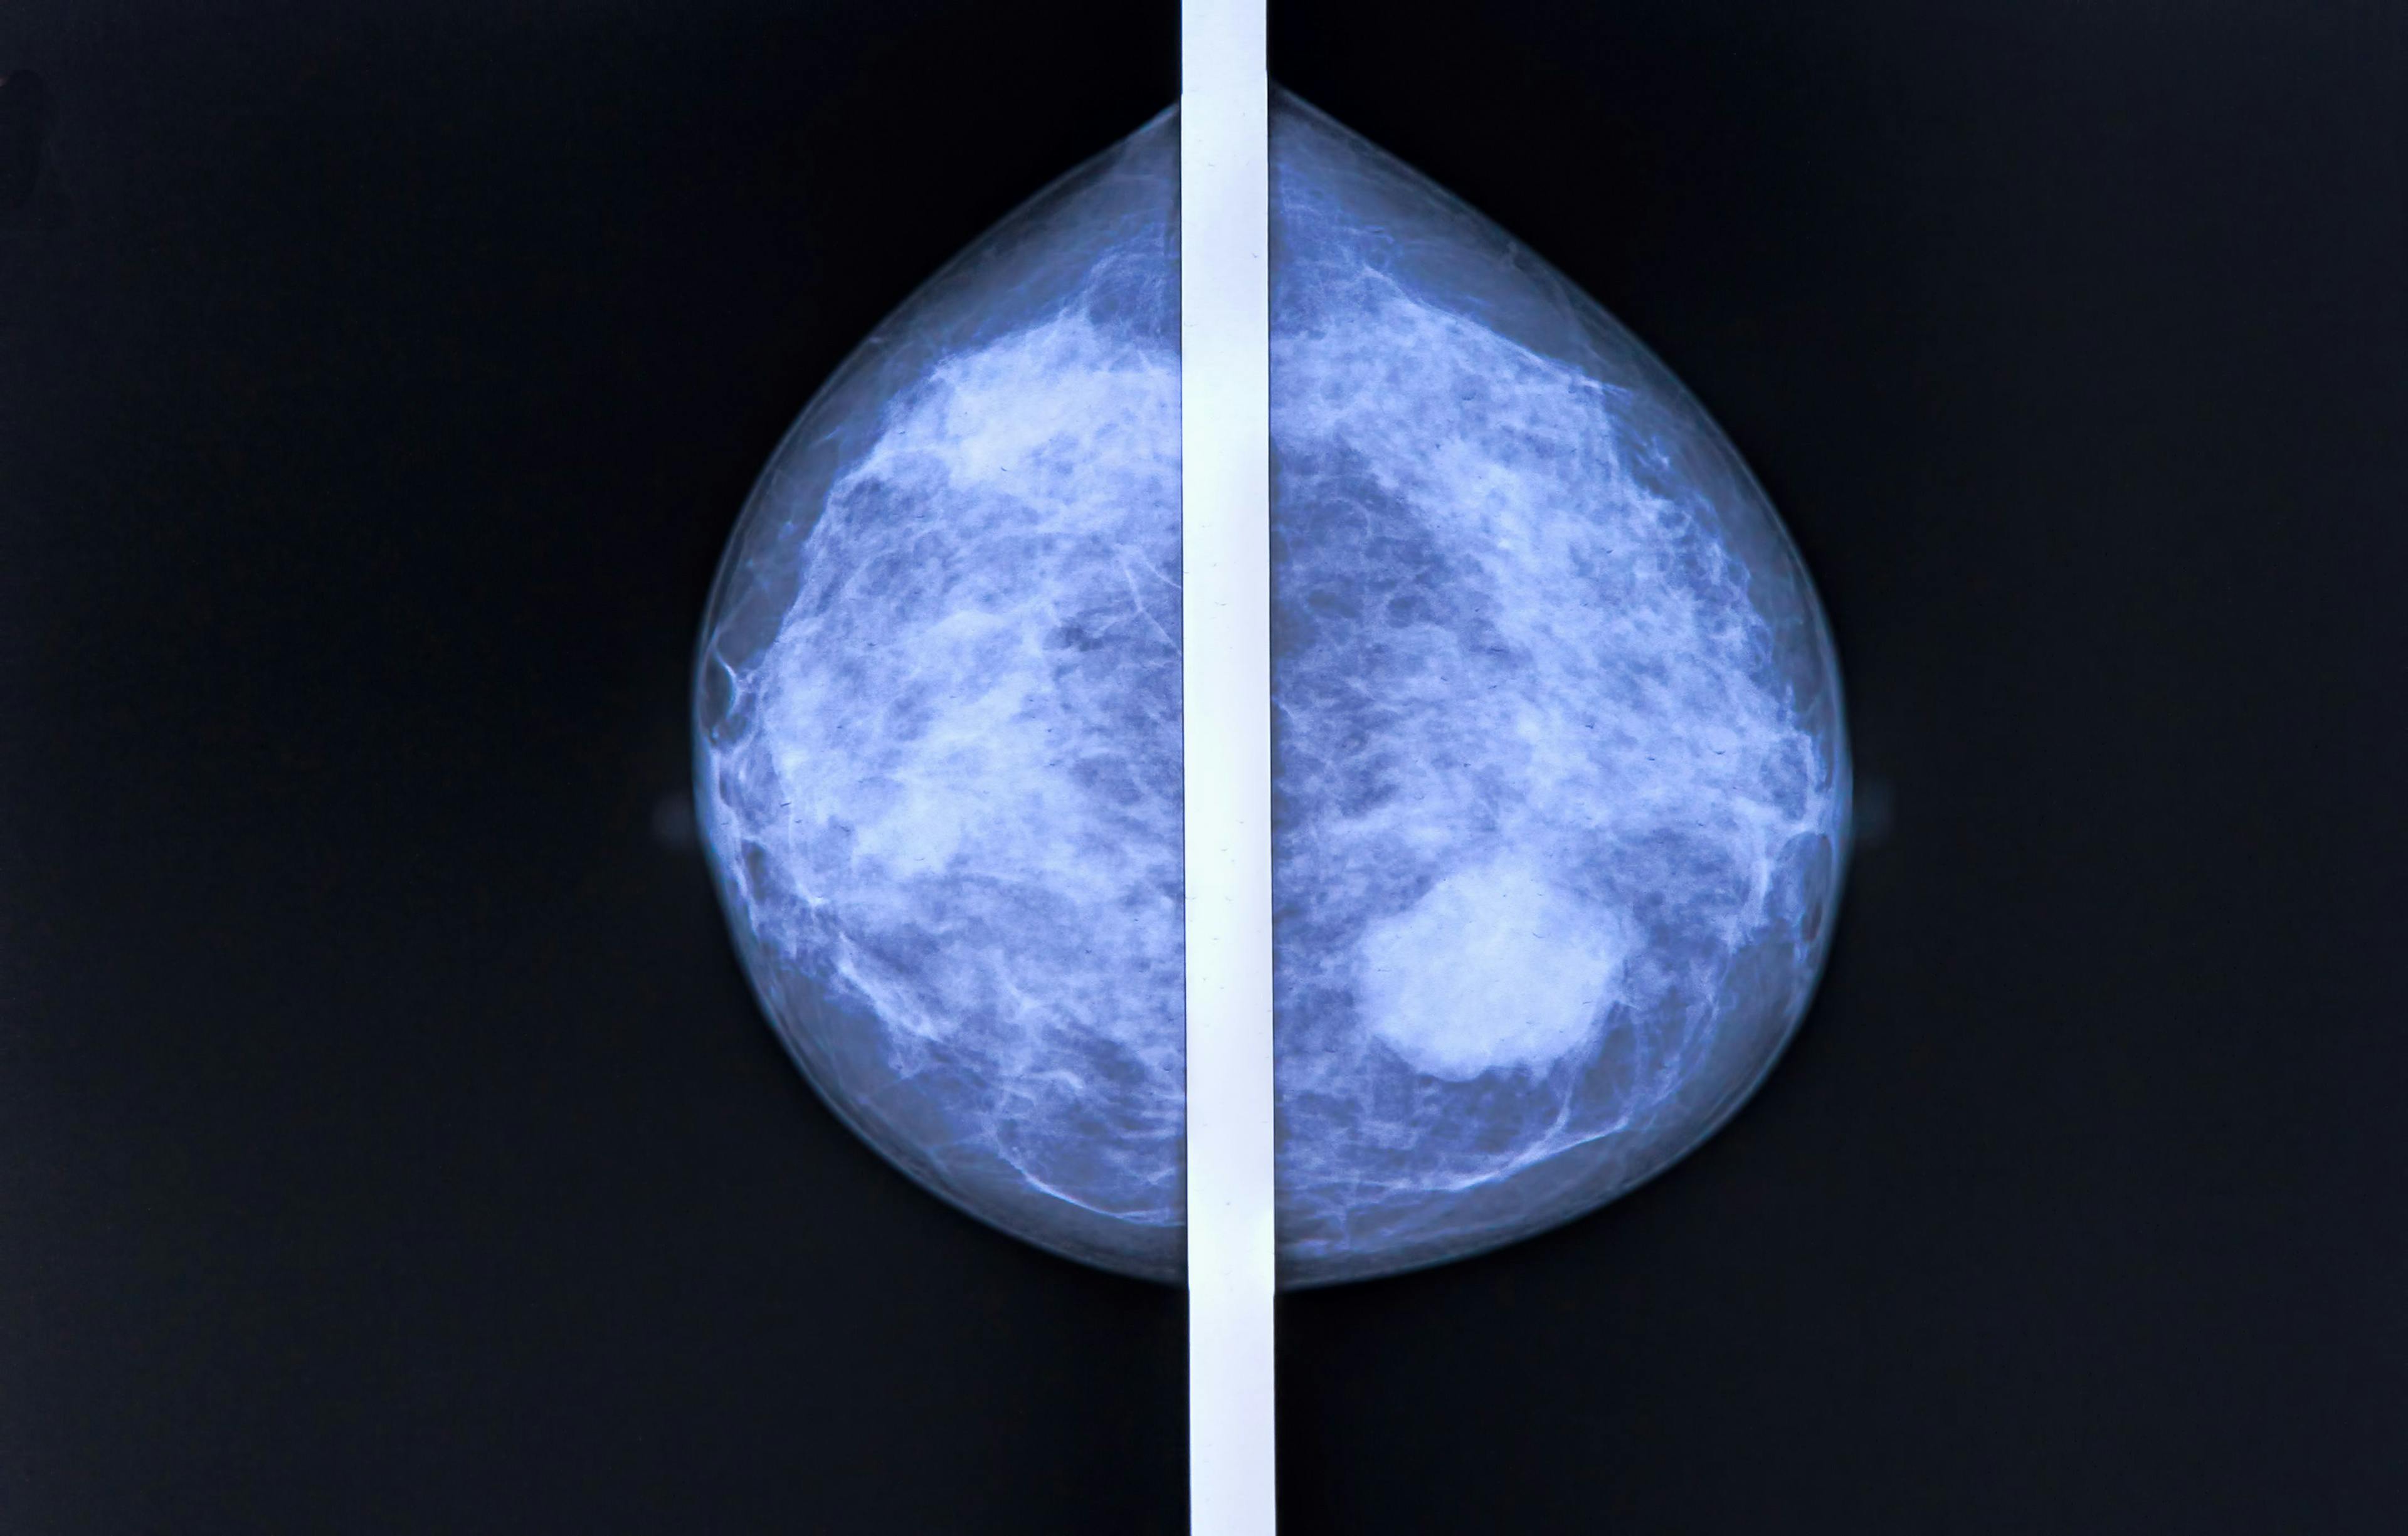 CDK4/6 Inhibitors Gain Momentum in Early-Stage Breast Cancer, But More Research is Still Needed